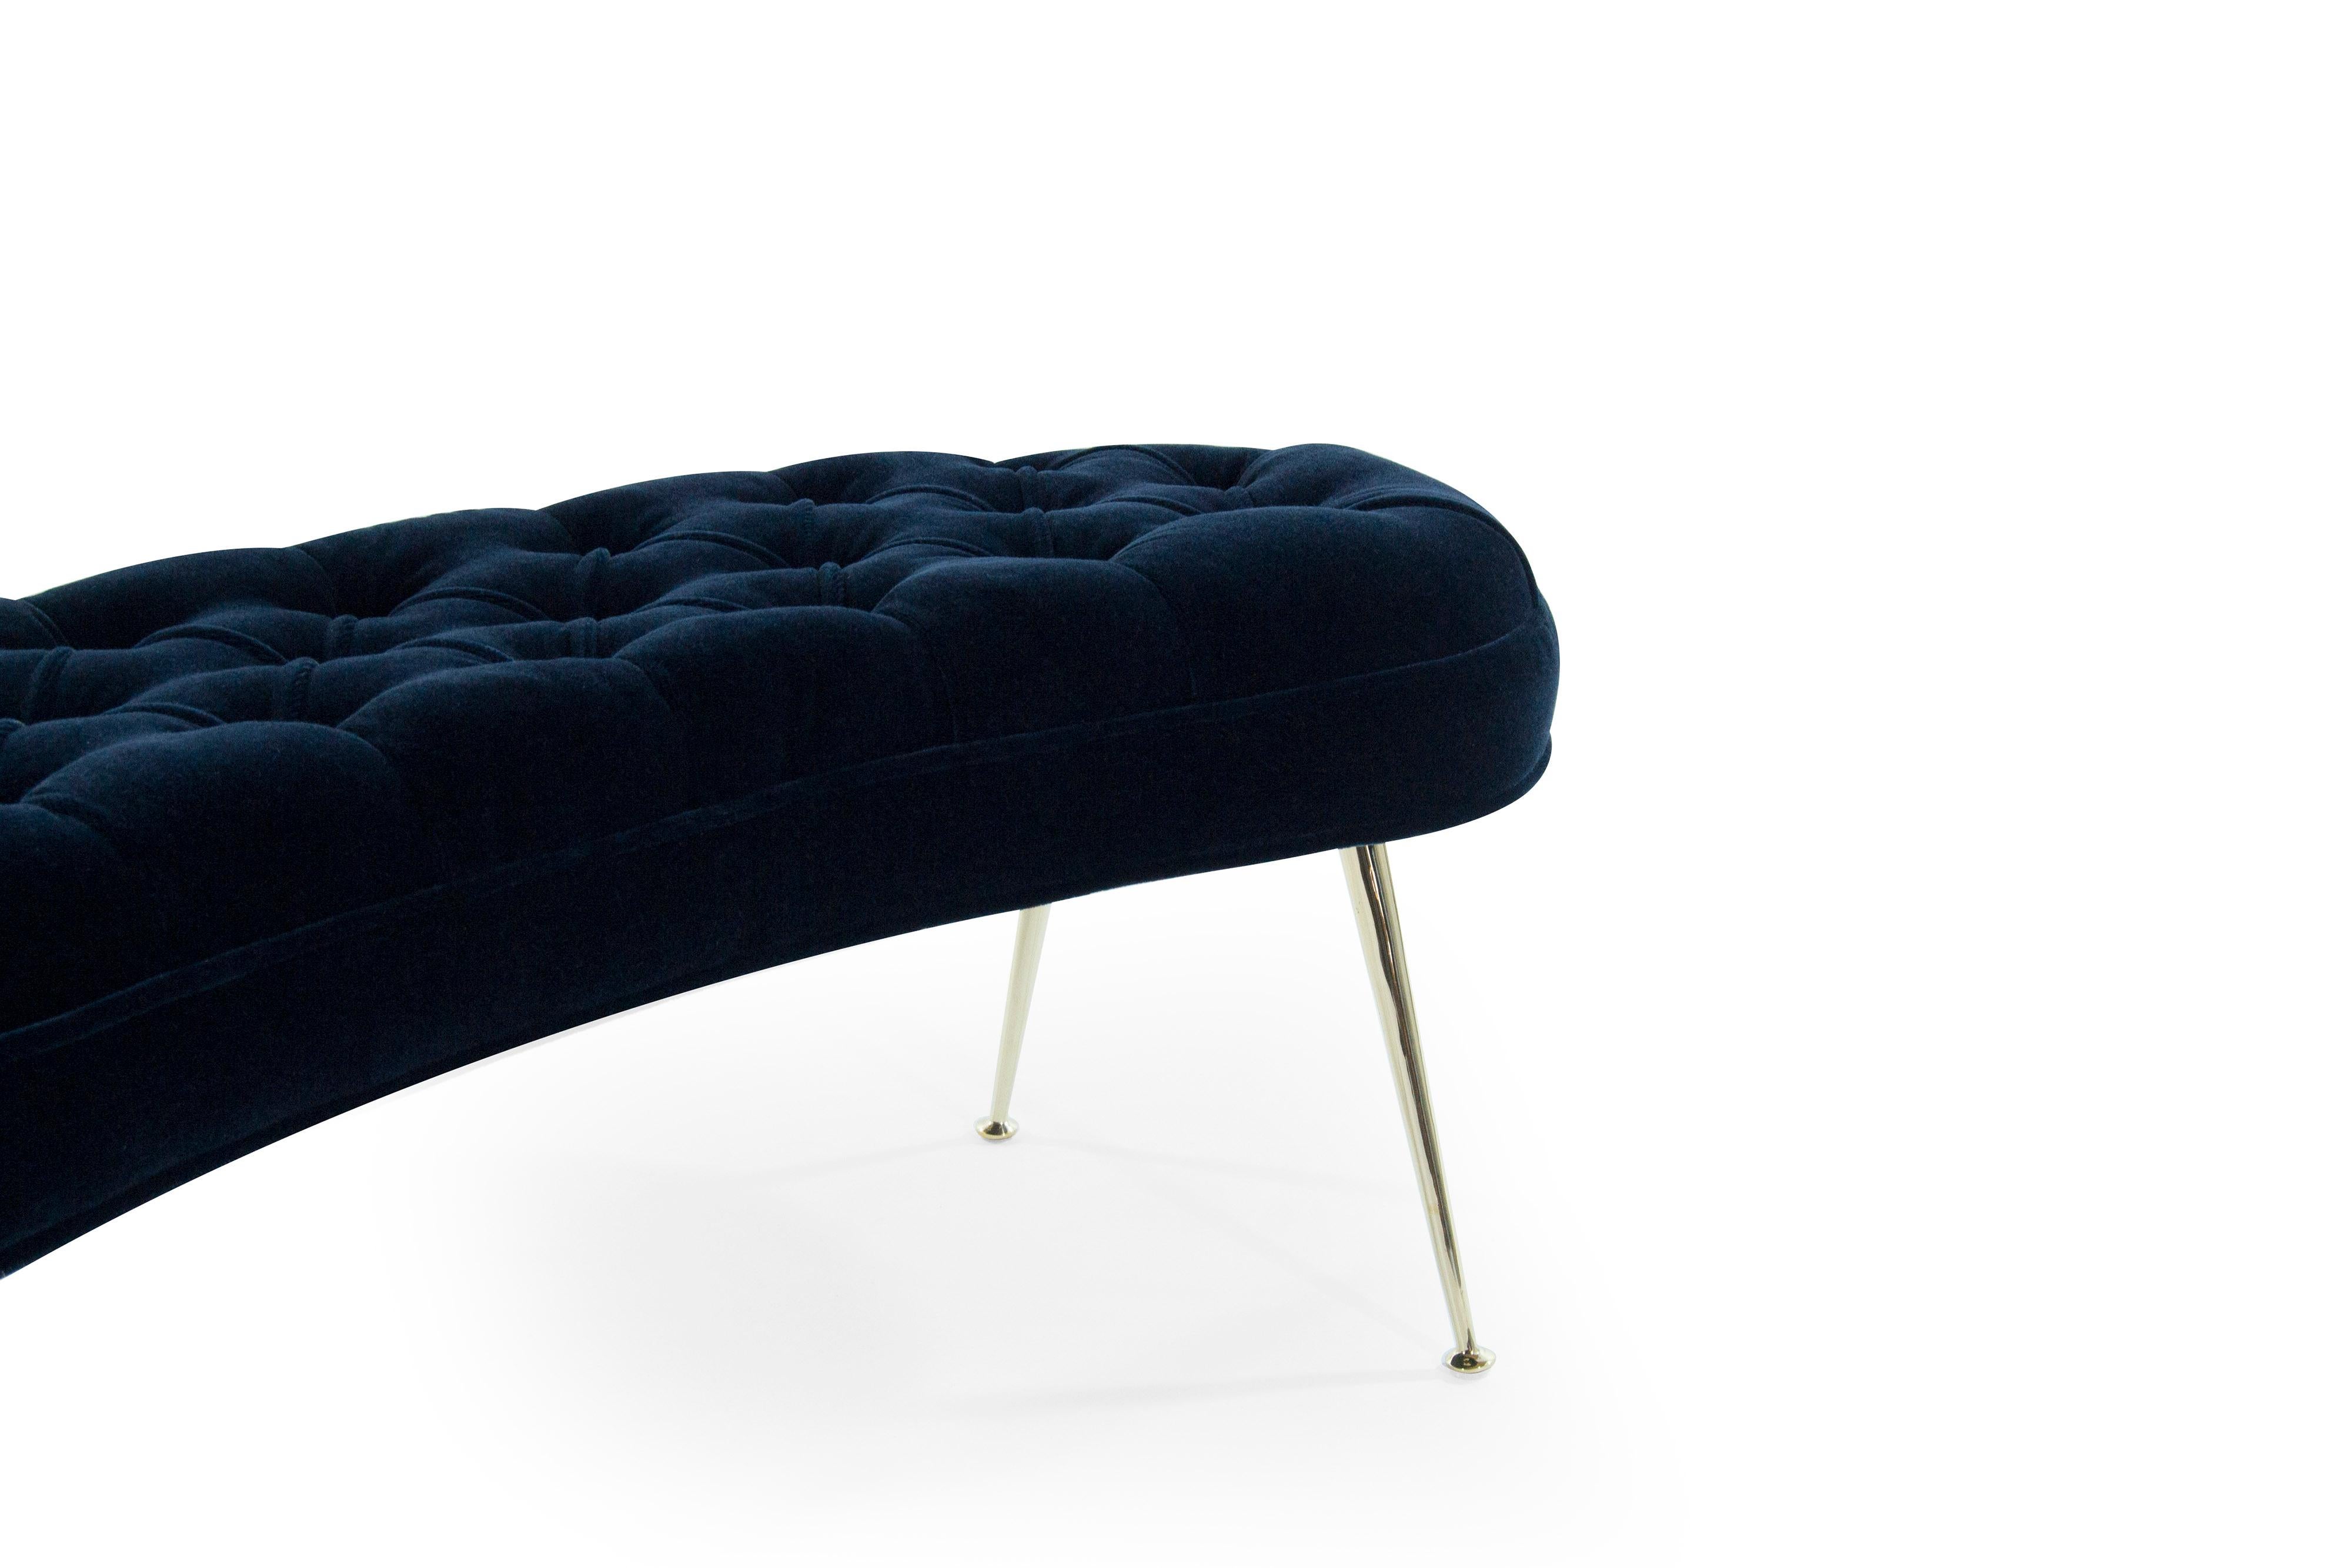 20th Century Pair of Tufted Benches in Deep Blue Mohair